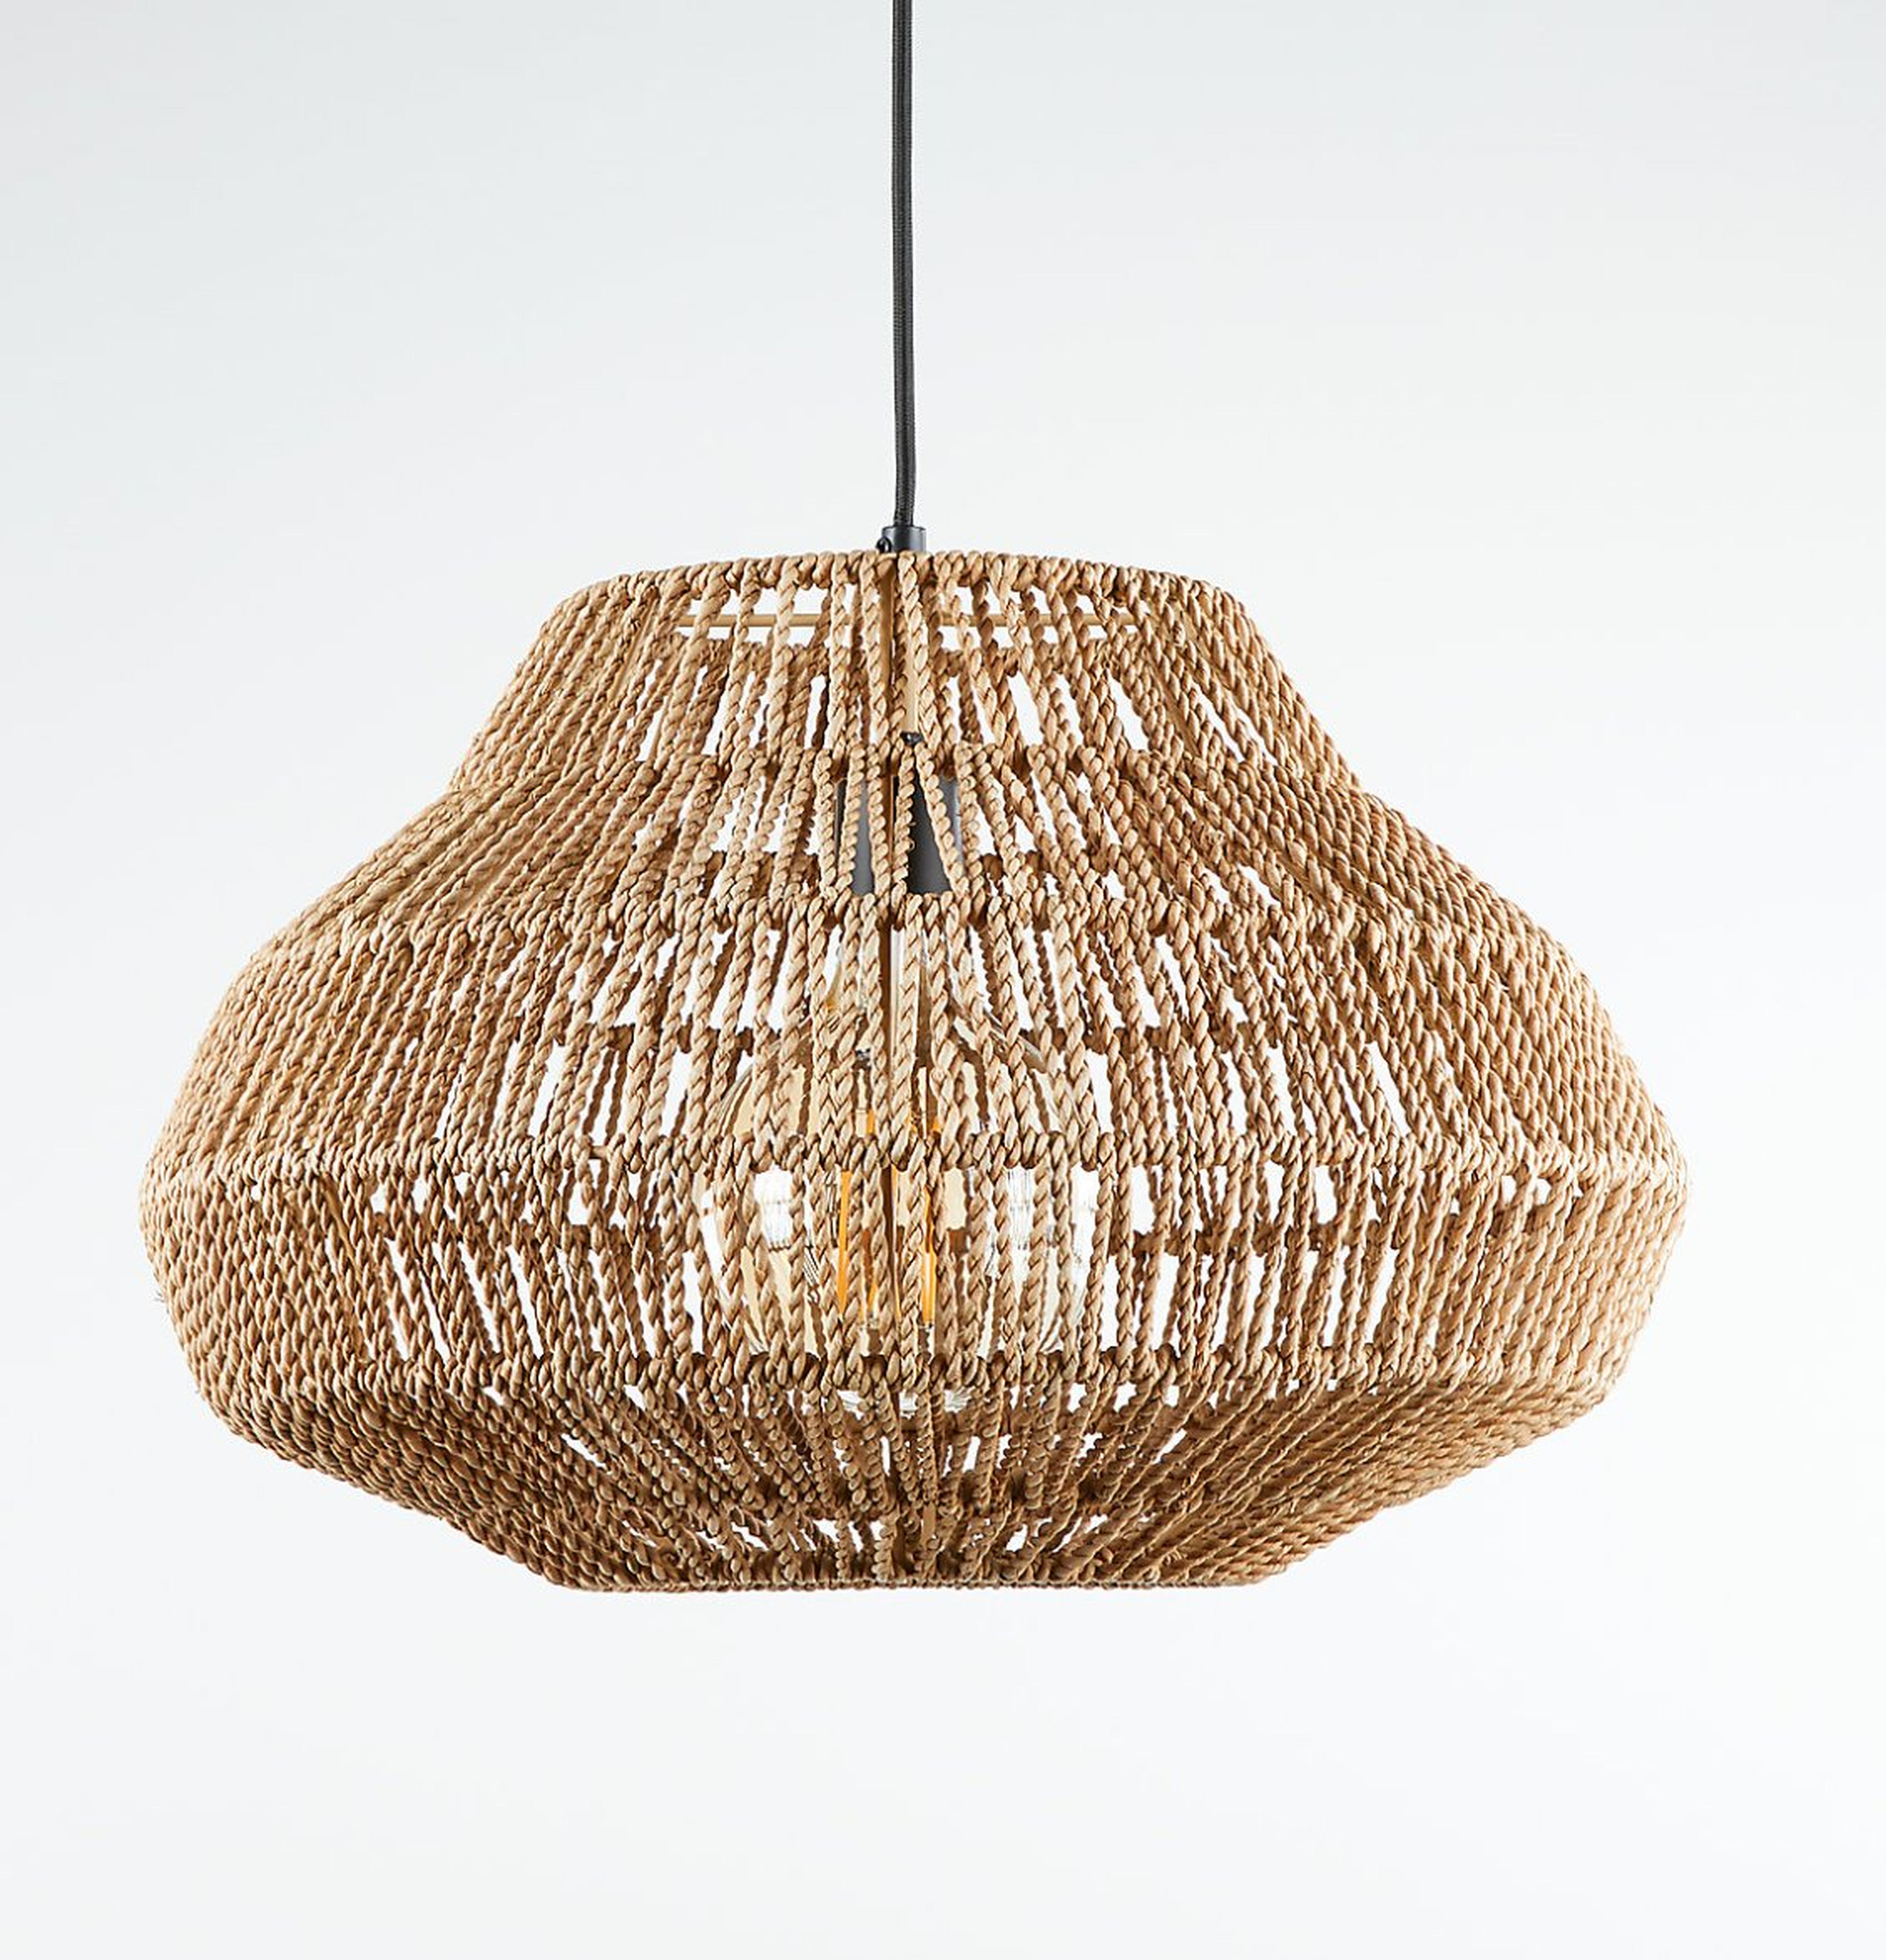 Cabo Small Woven Pendant Light - Crate and Barrel